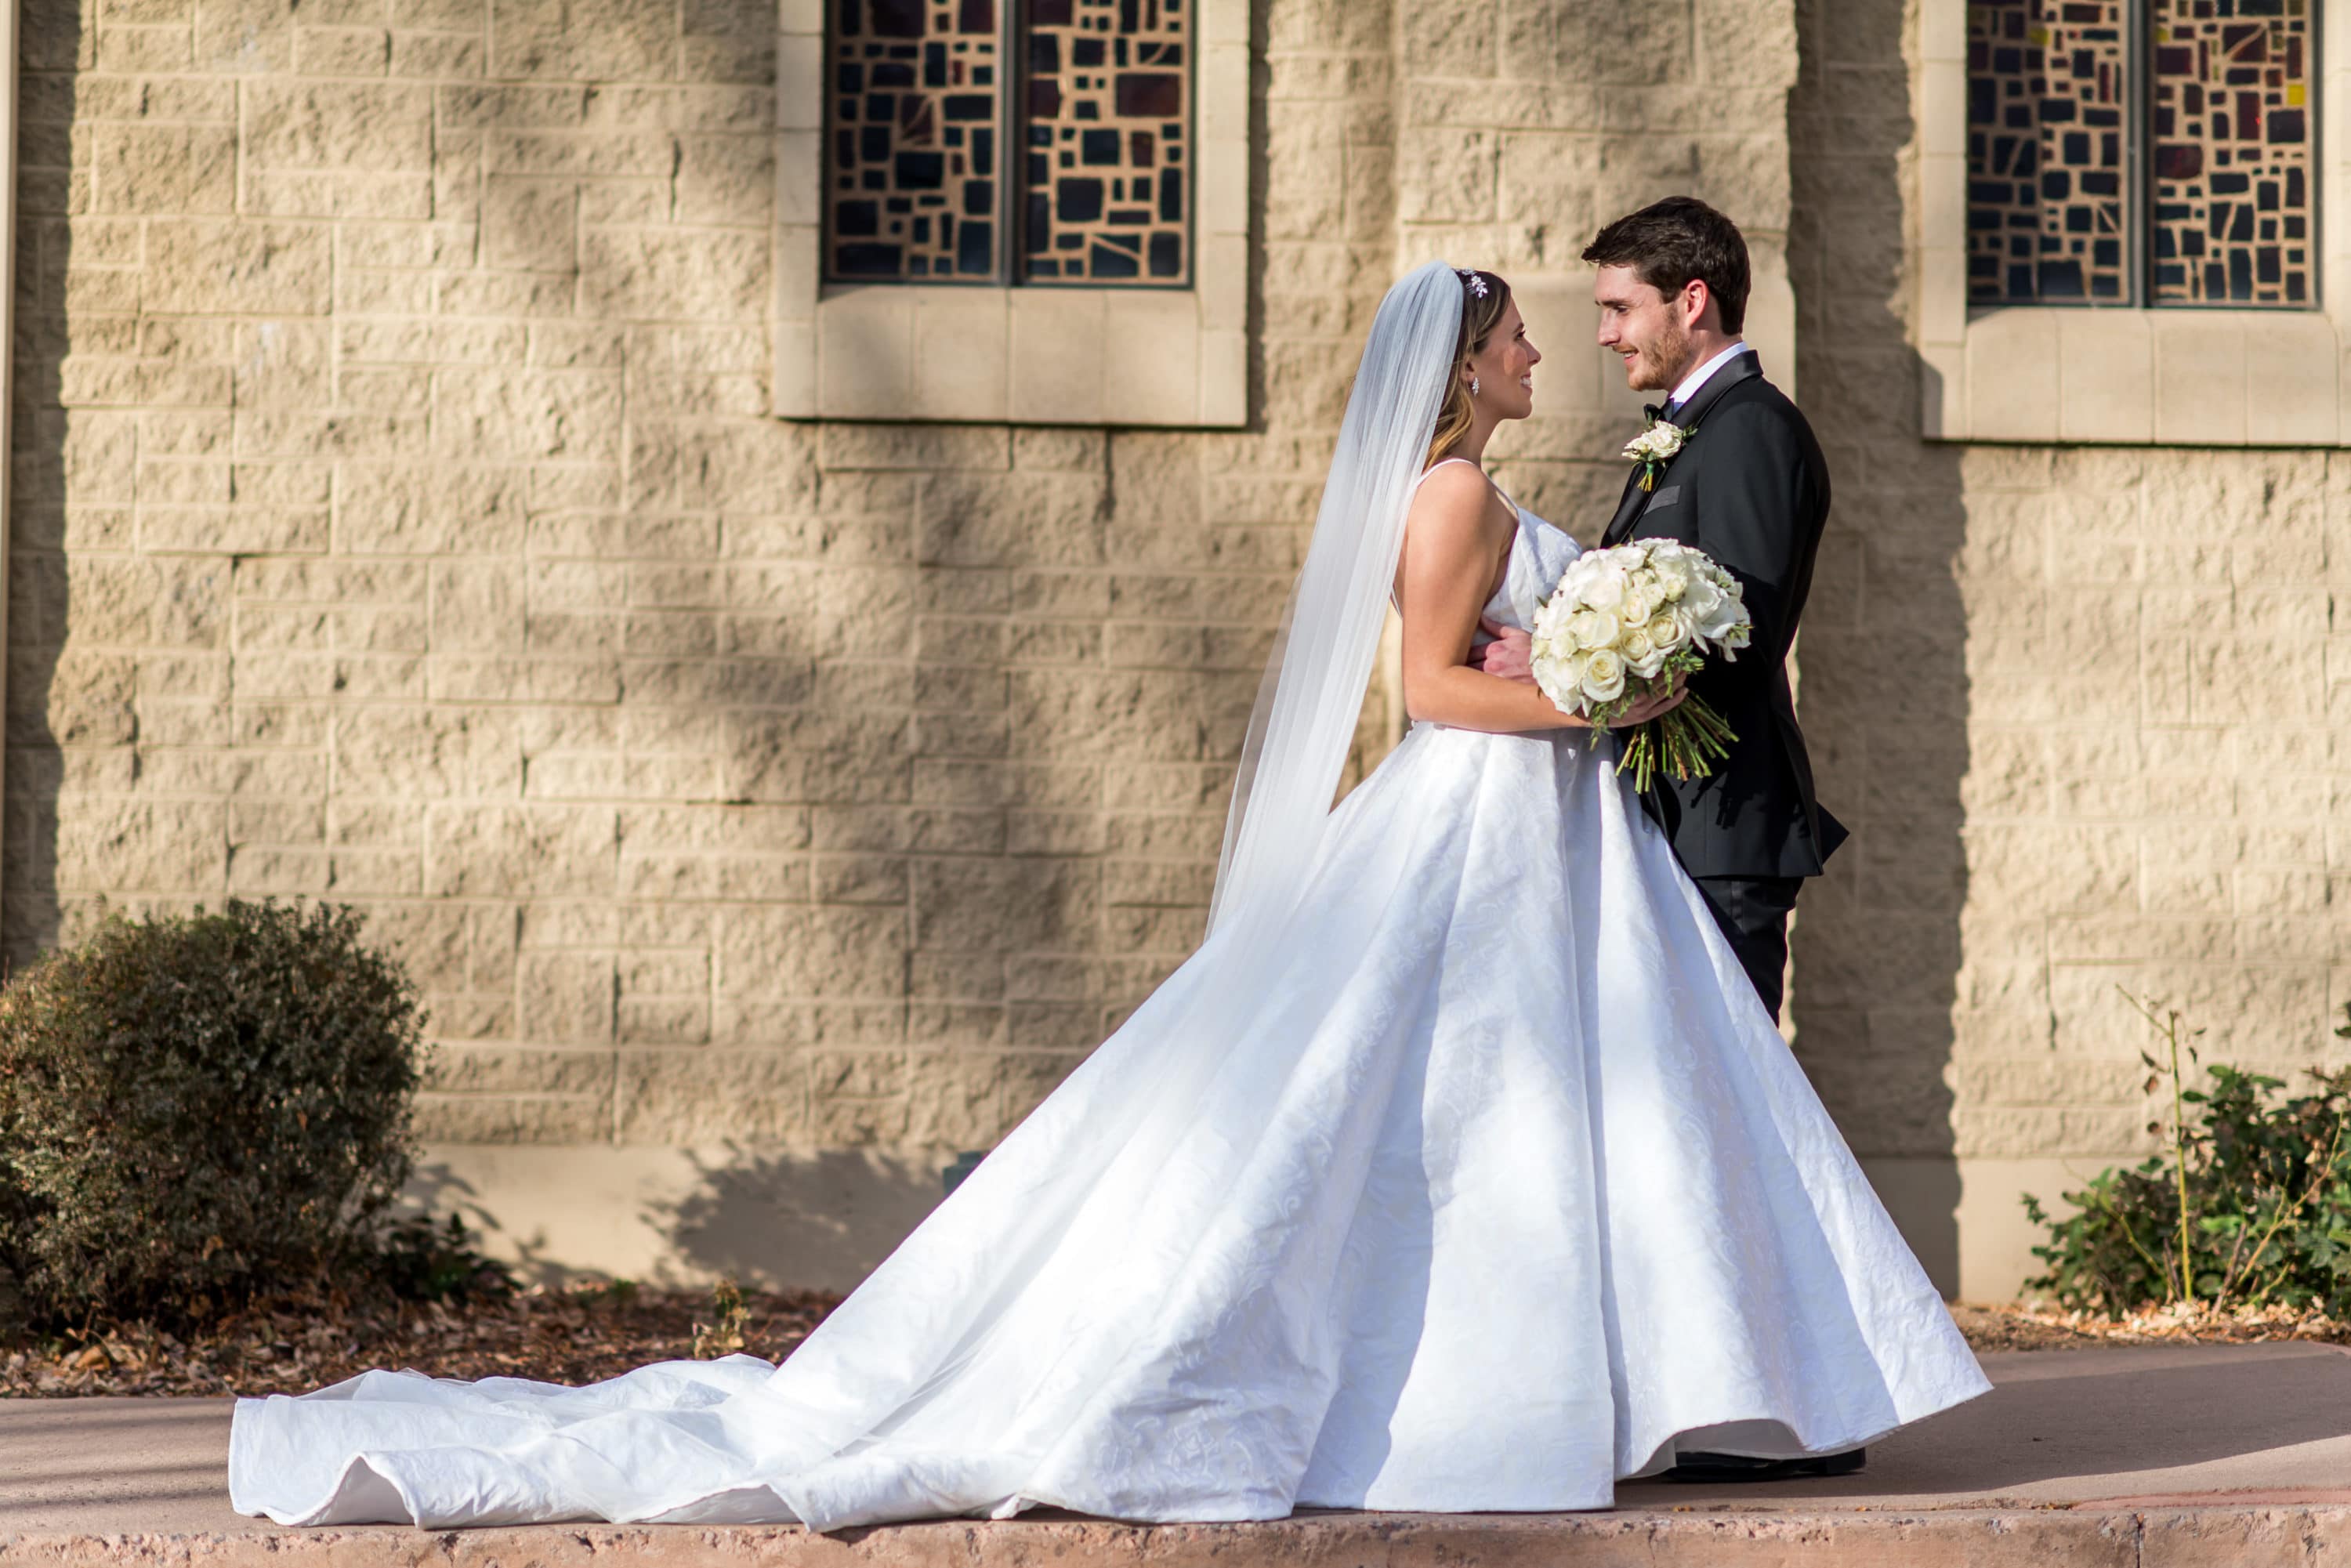 Bride and Groom pose outside Blessed Sacrament Denver Church after a wedding.